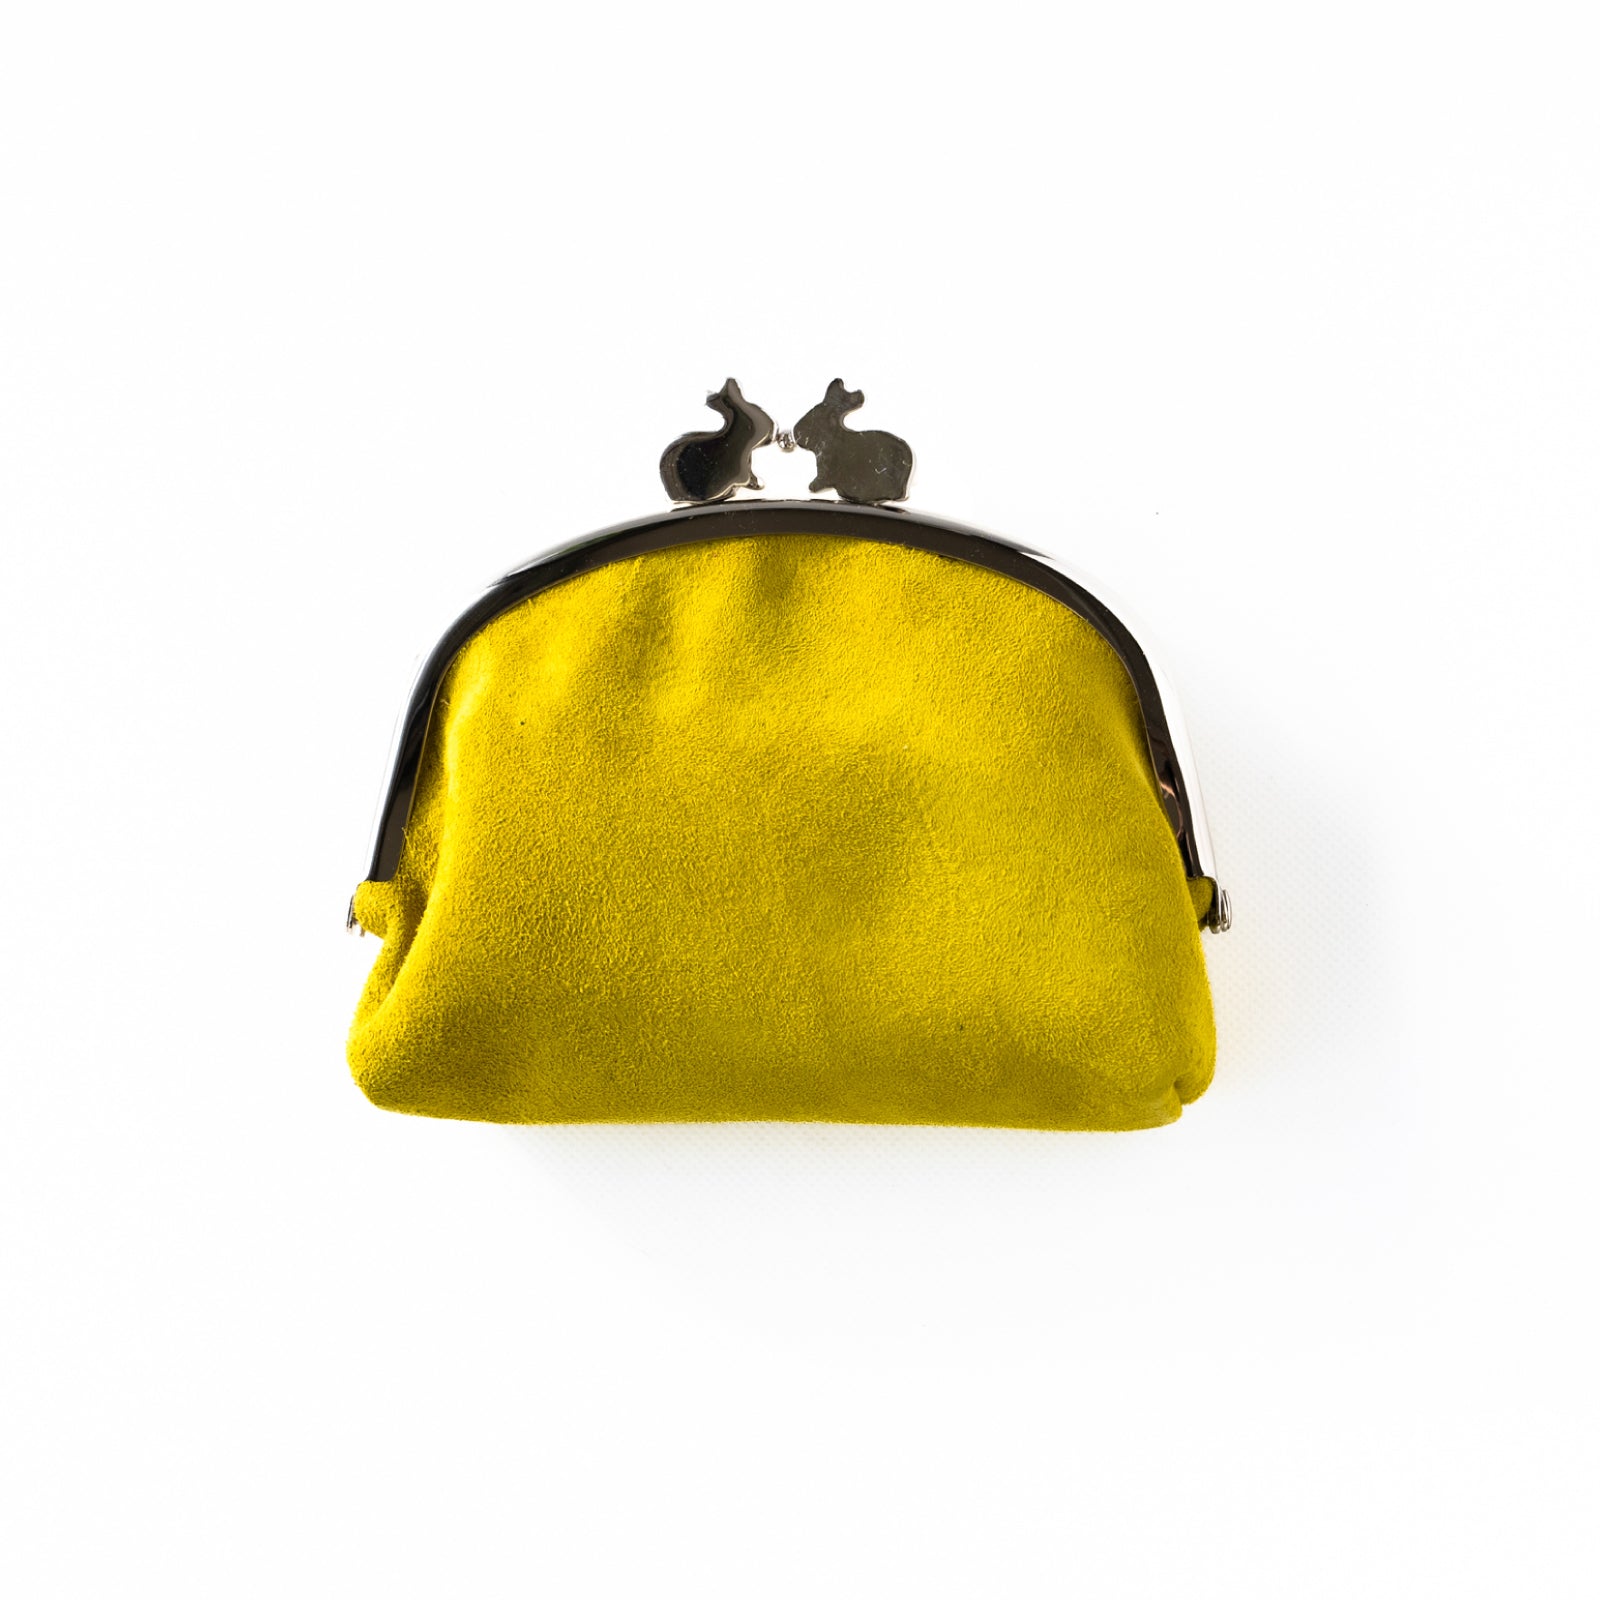 Rabbit pouch suede leather 